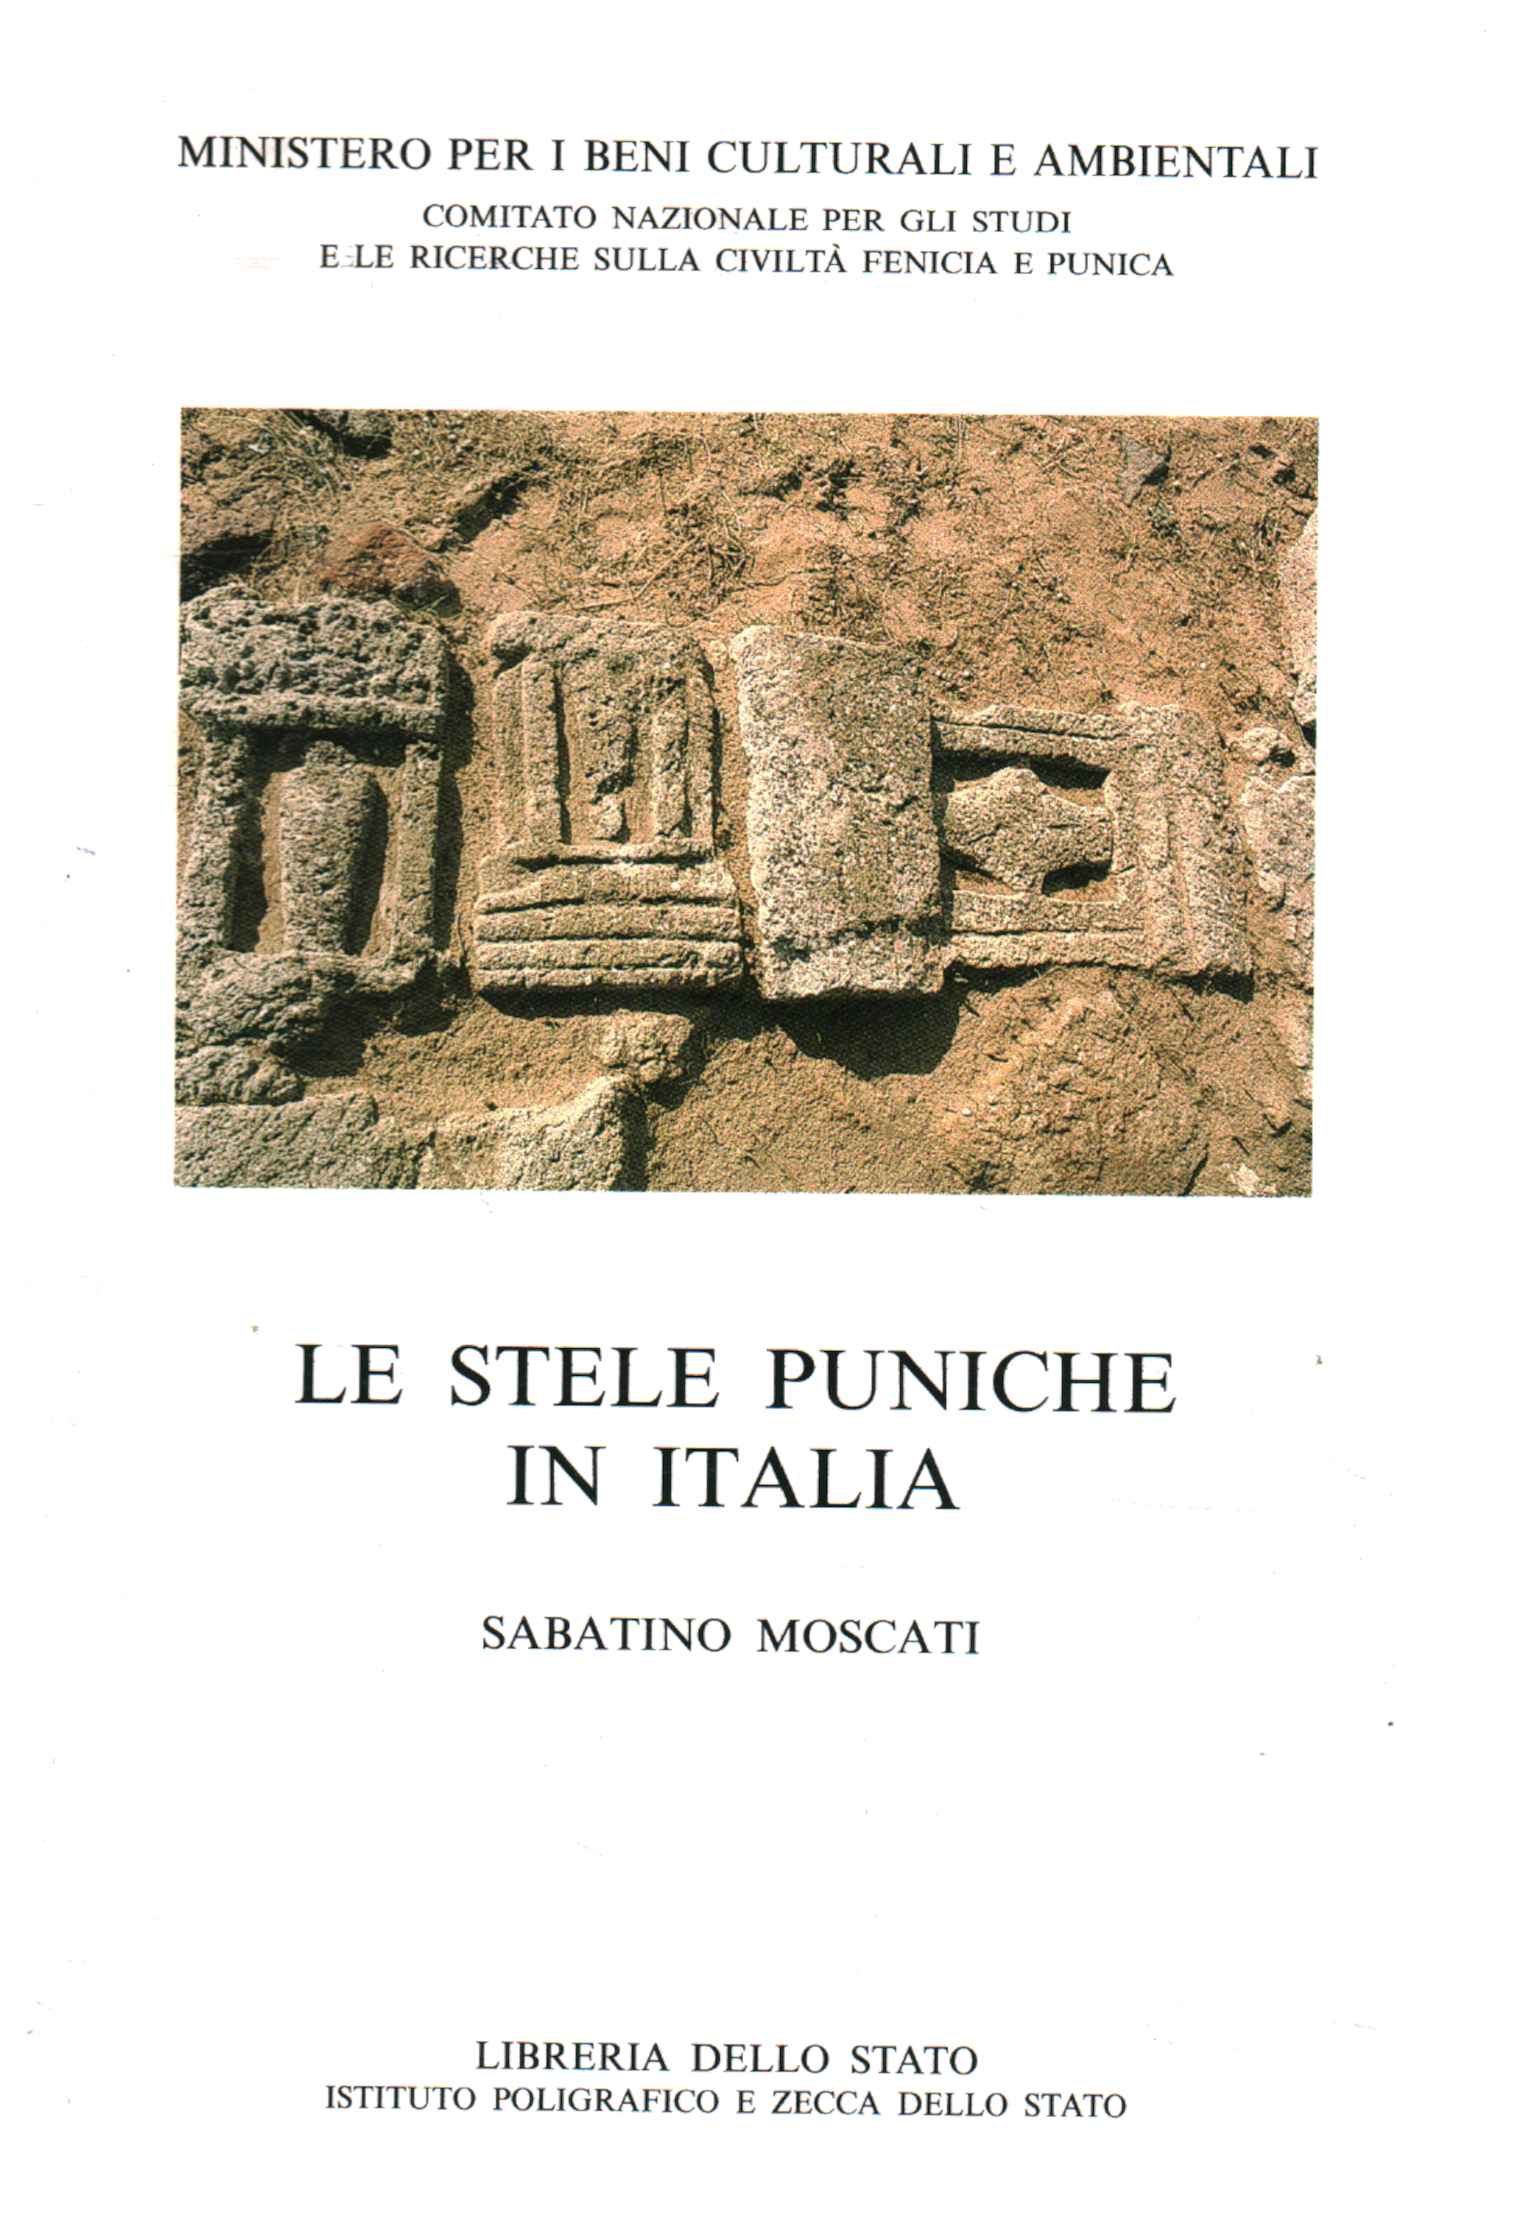 Itineraries - X. The Punic stelae in I,The Punic stelae in Italy